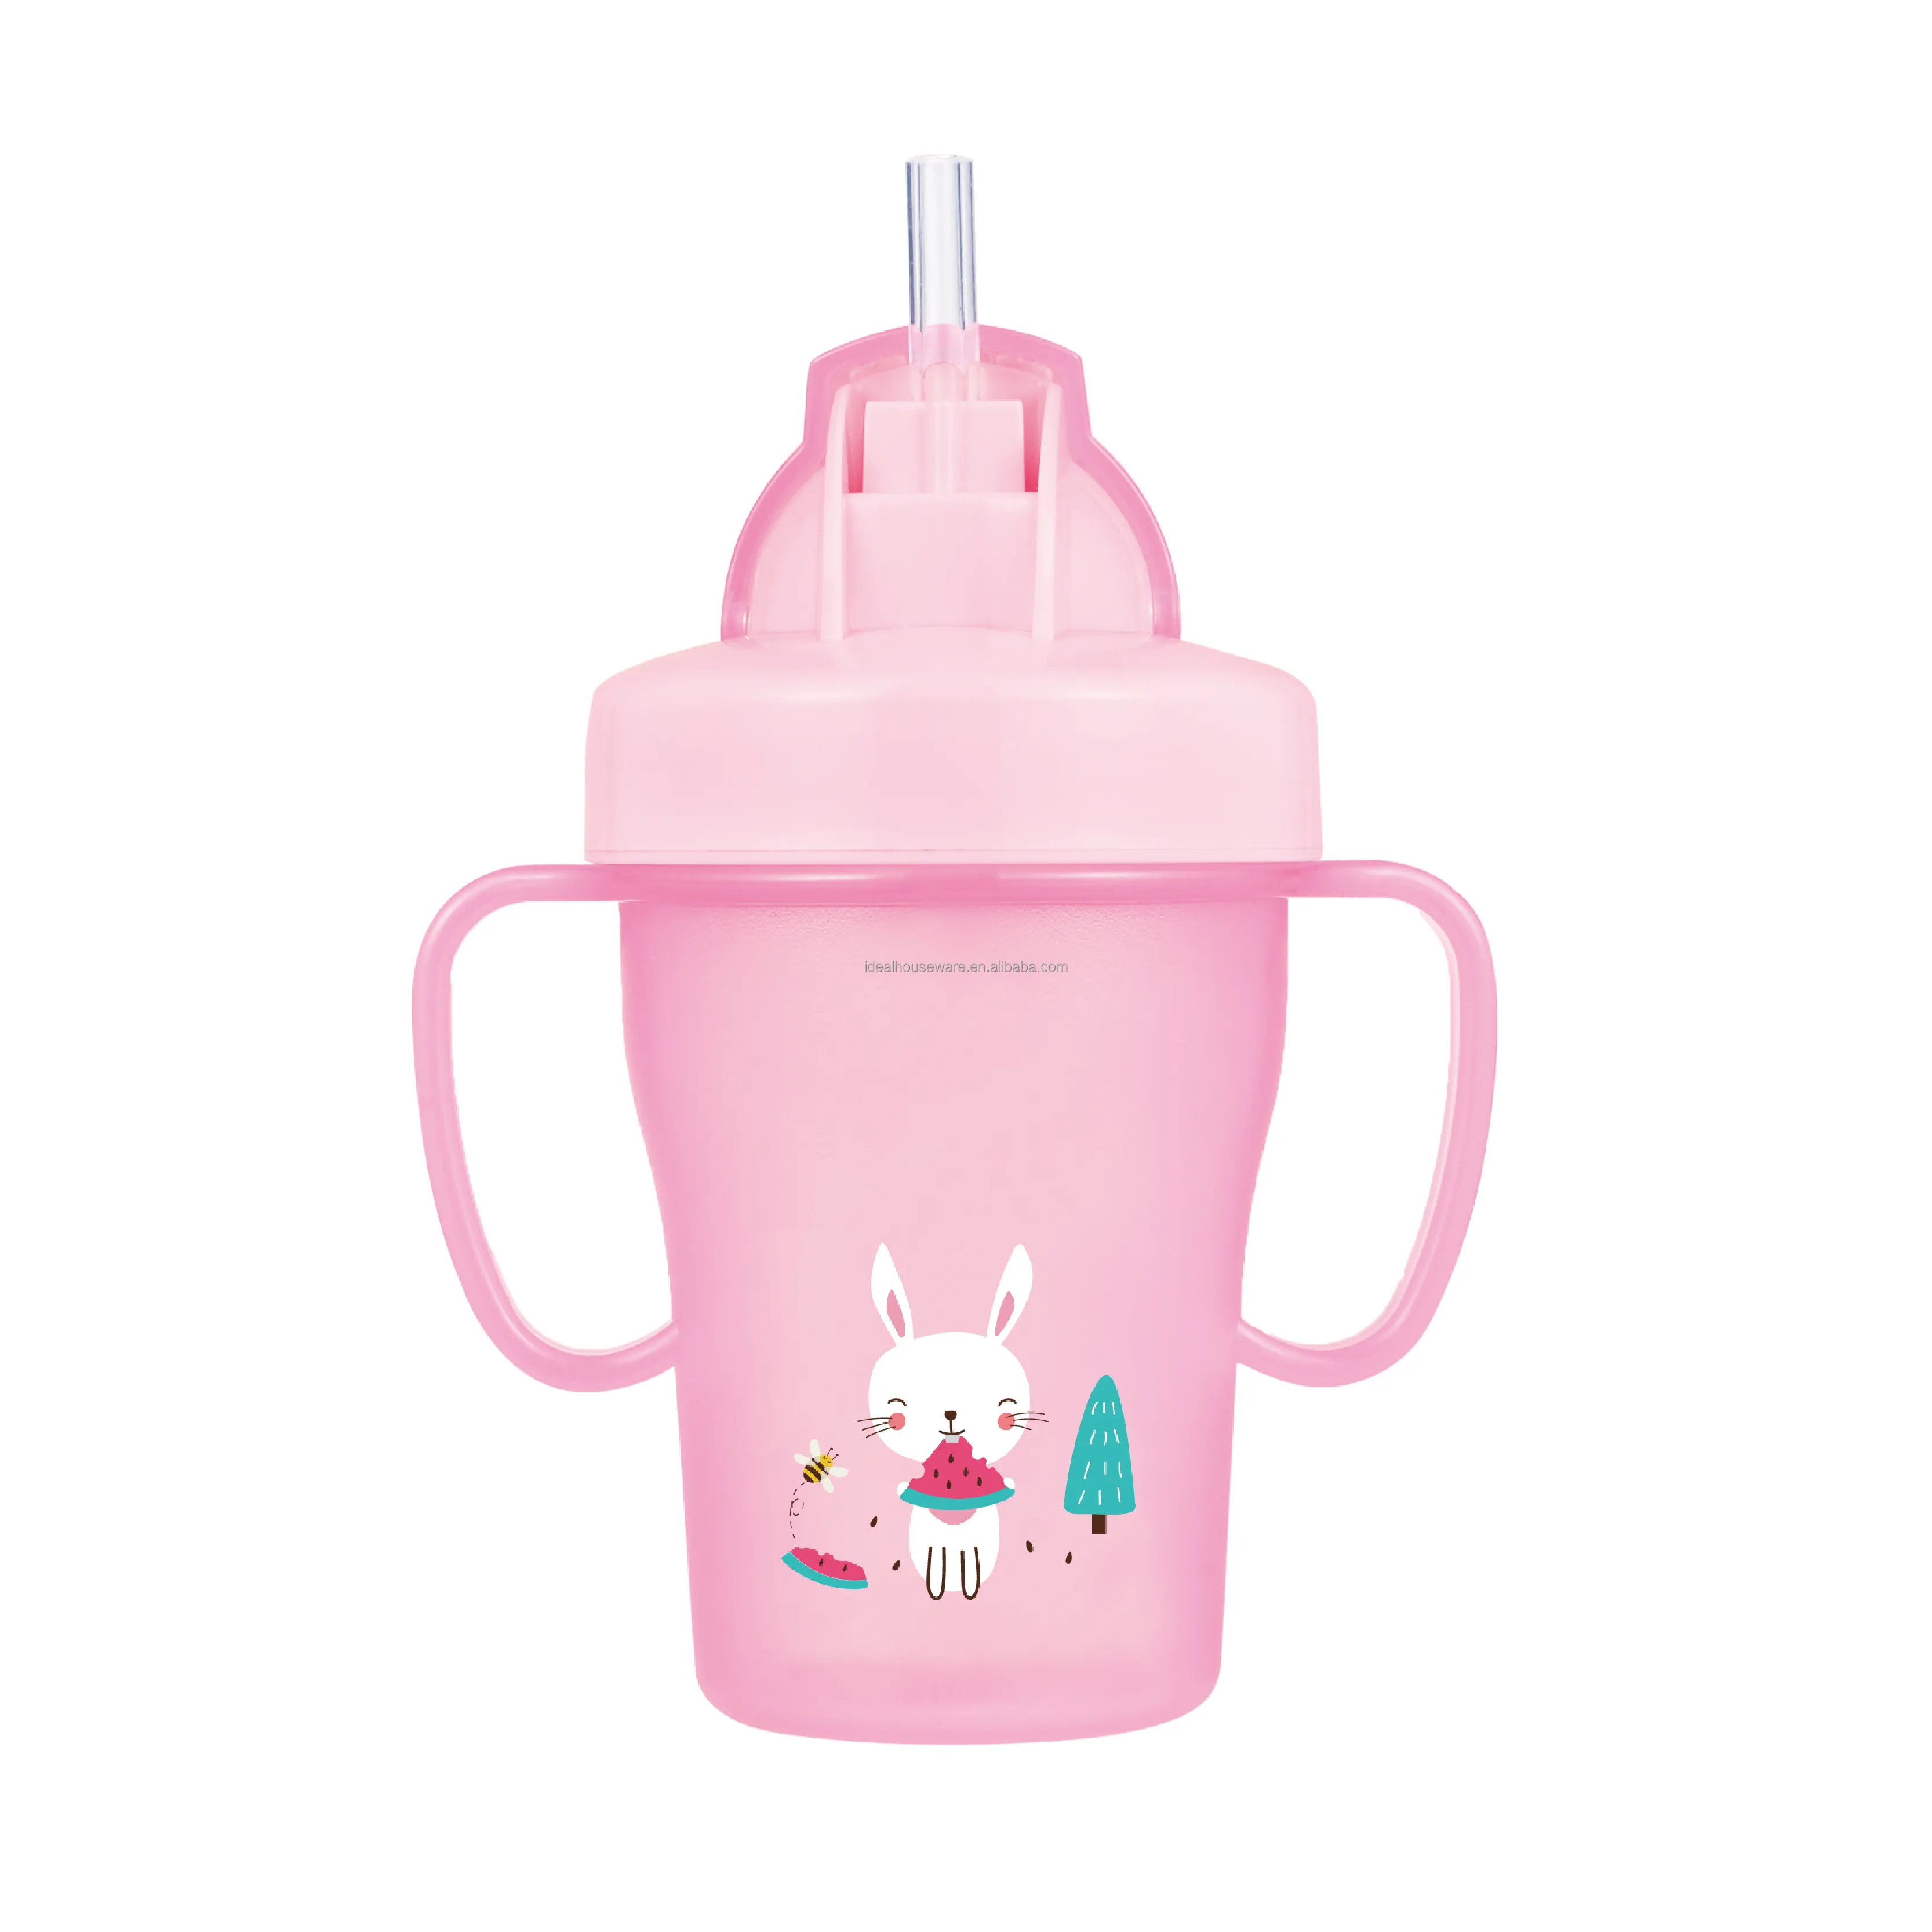 7Oz/200Ml Pp Baby Training Cup Baby Cup Met Rietje